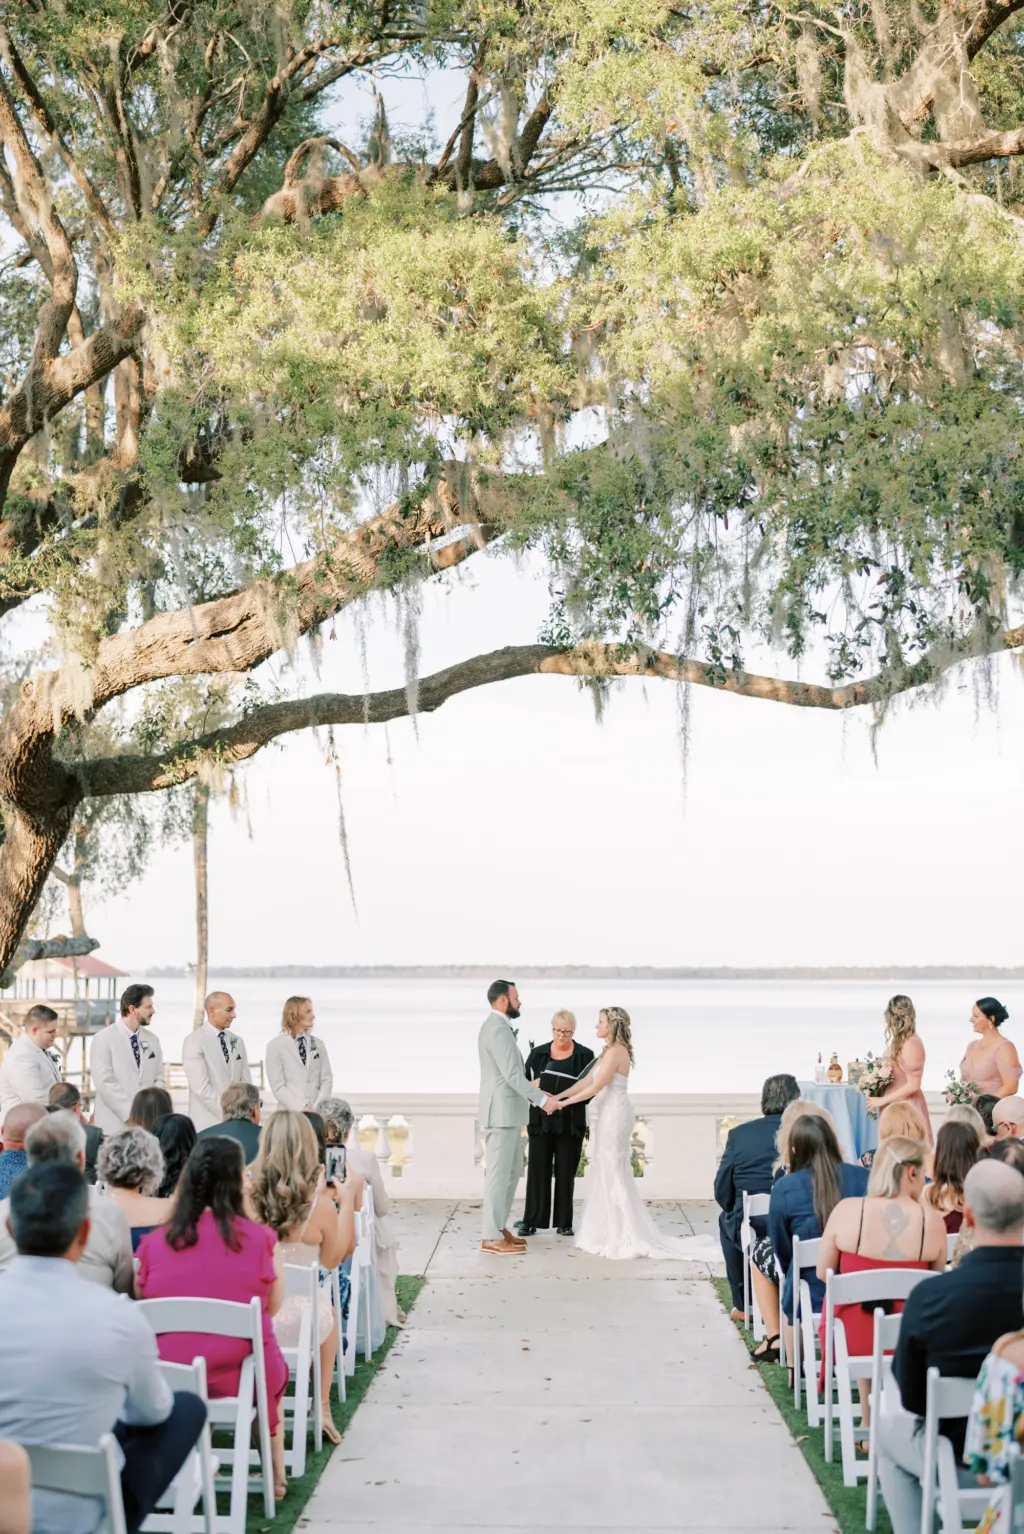 Bride and Groom Waterfront Wedding Ceremony Vow Exchange | Tampa Bay Planner B Eventful